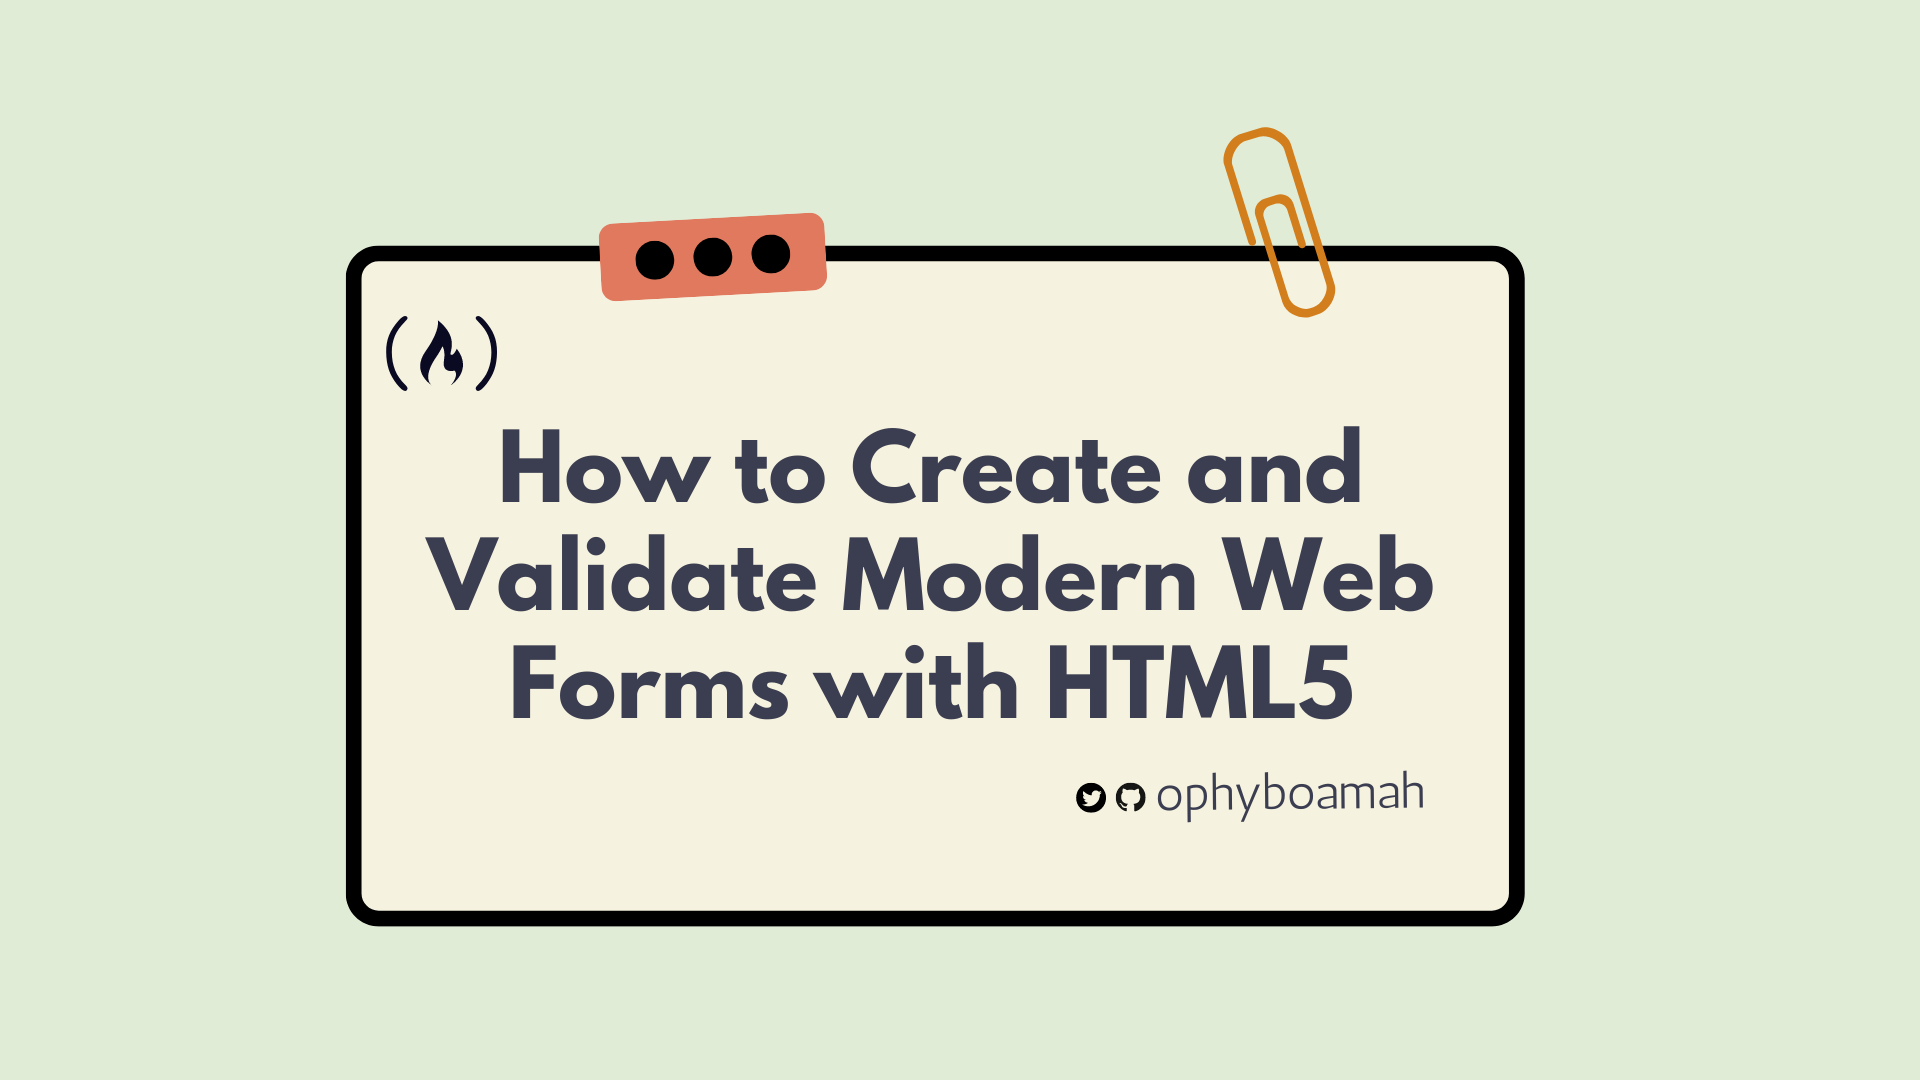 How to Create and Validate Modern Web Forms with HTML5